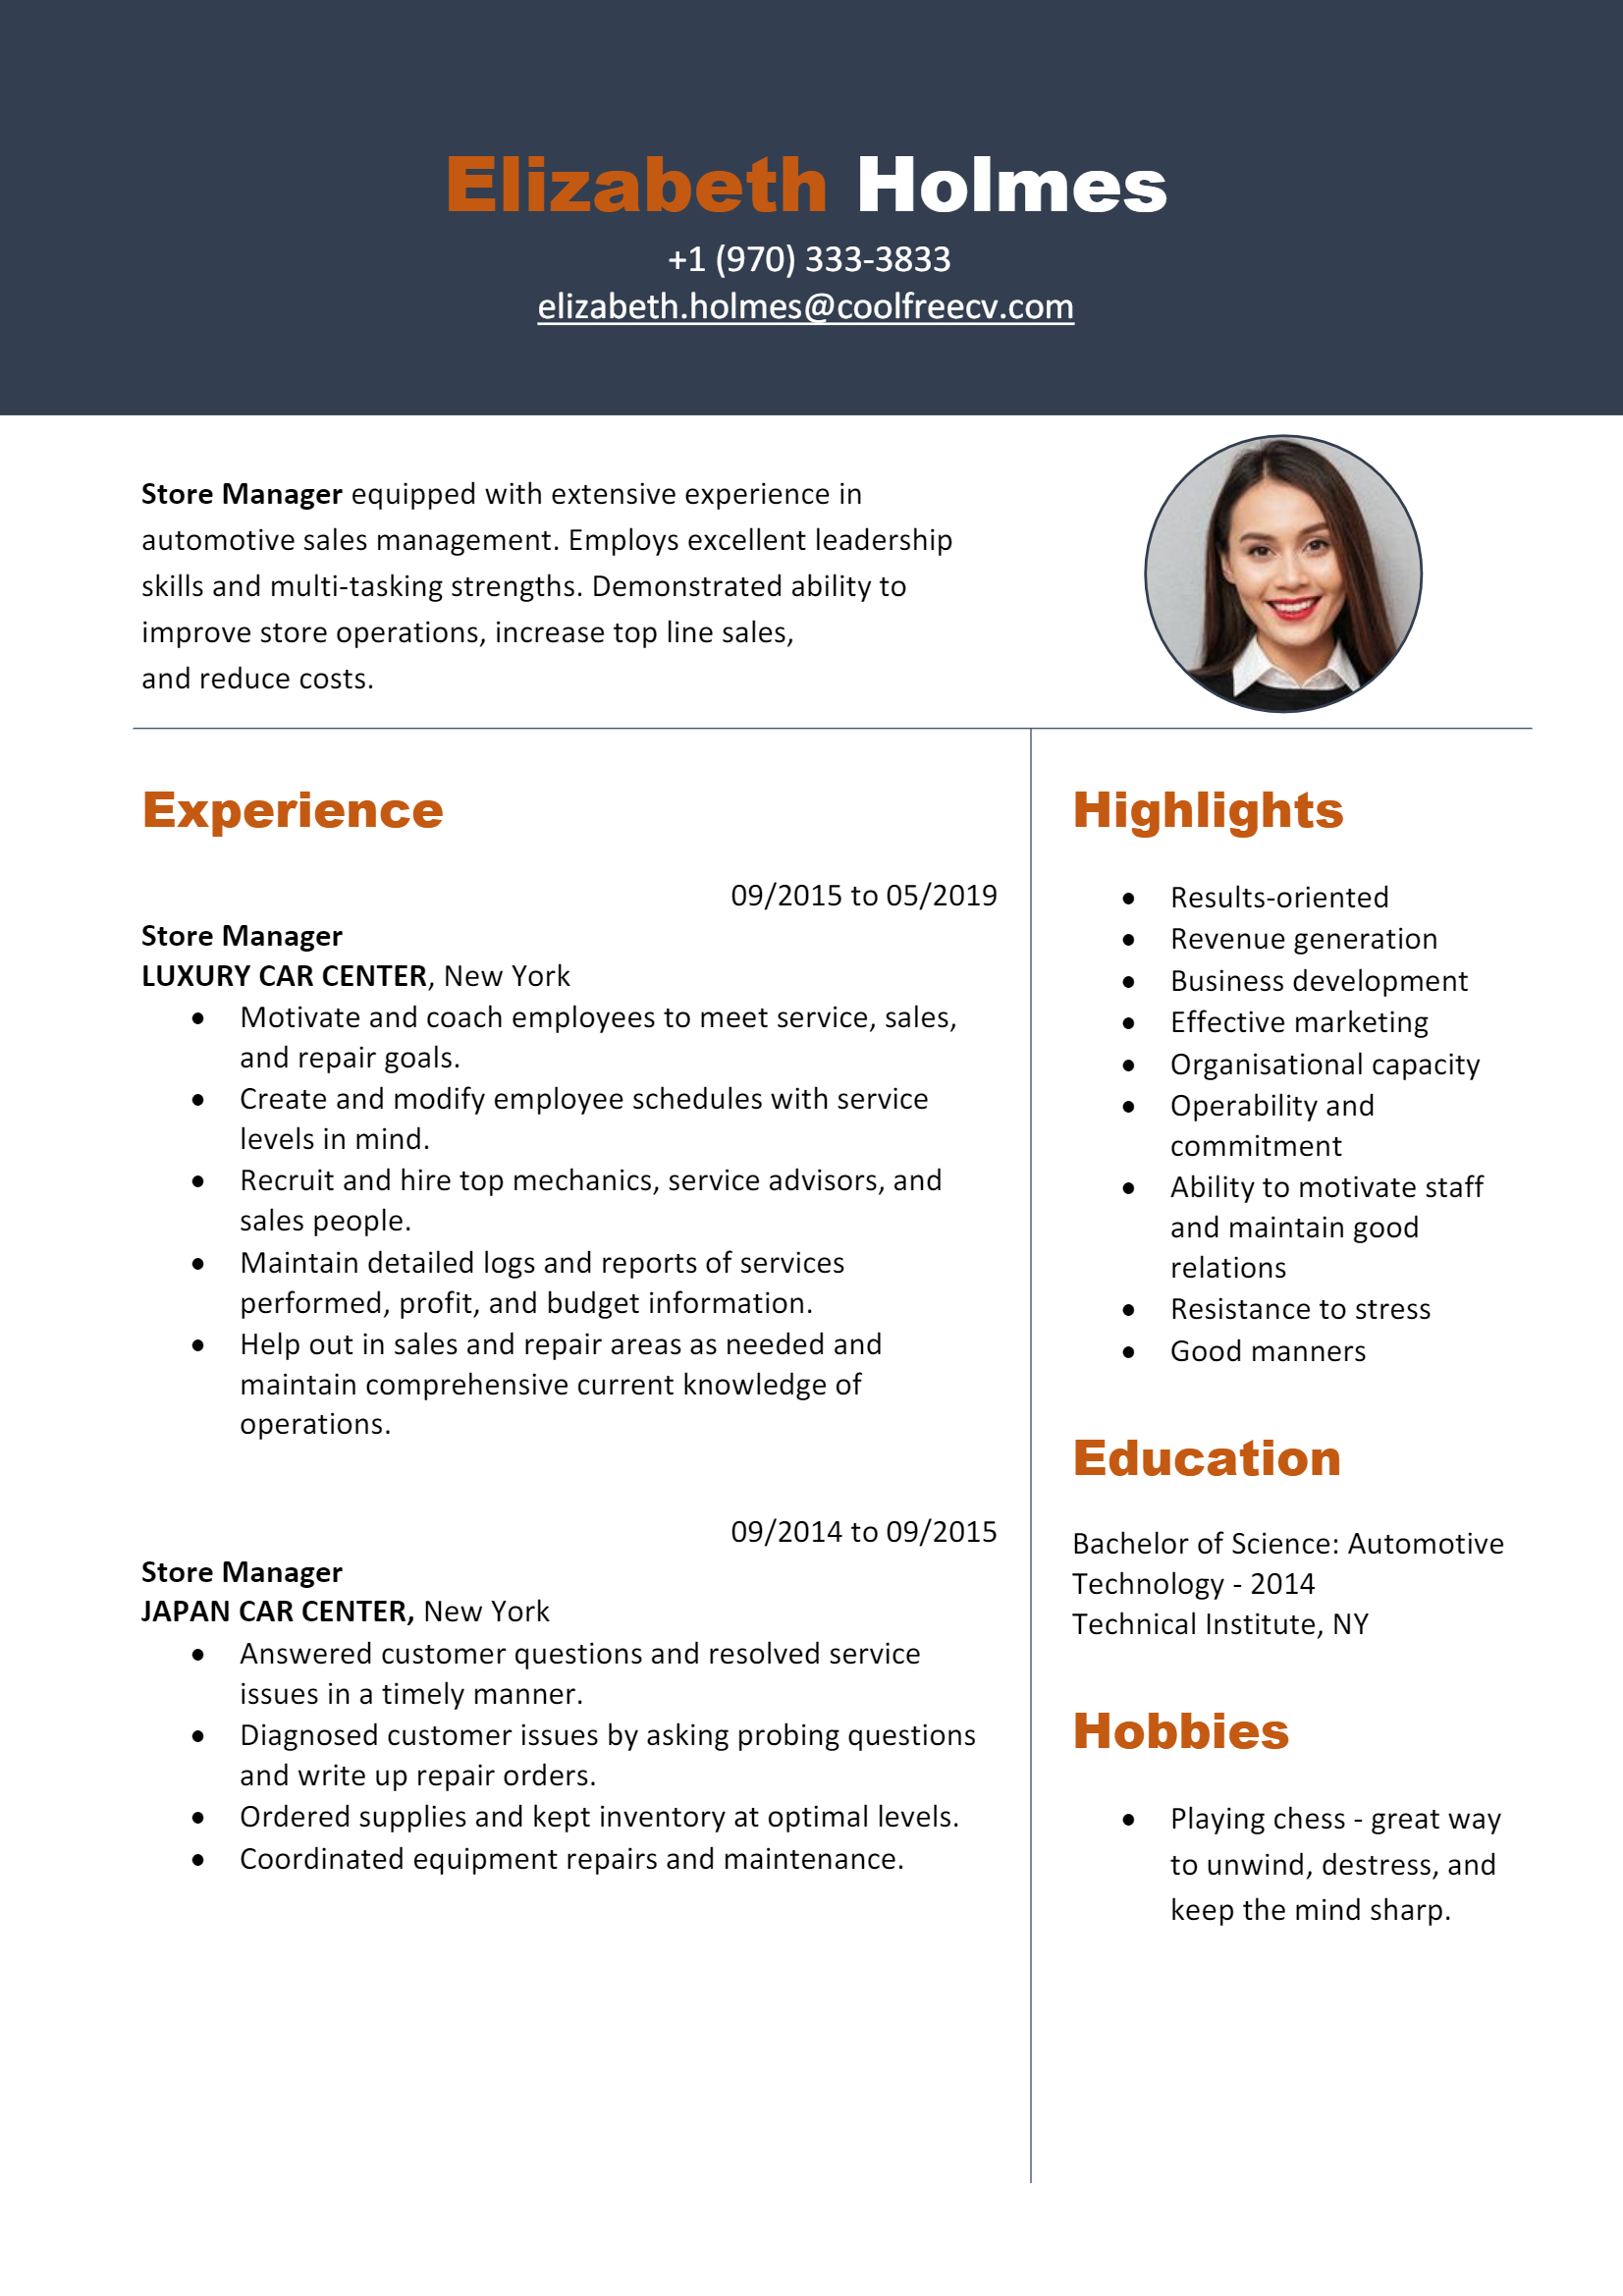 Store Manager Resume .Docx (Word)